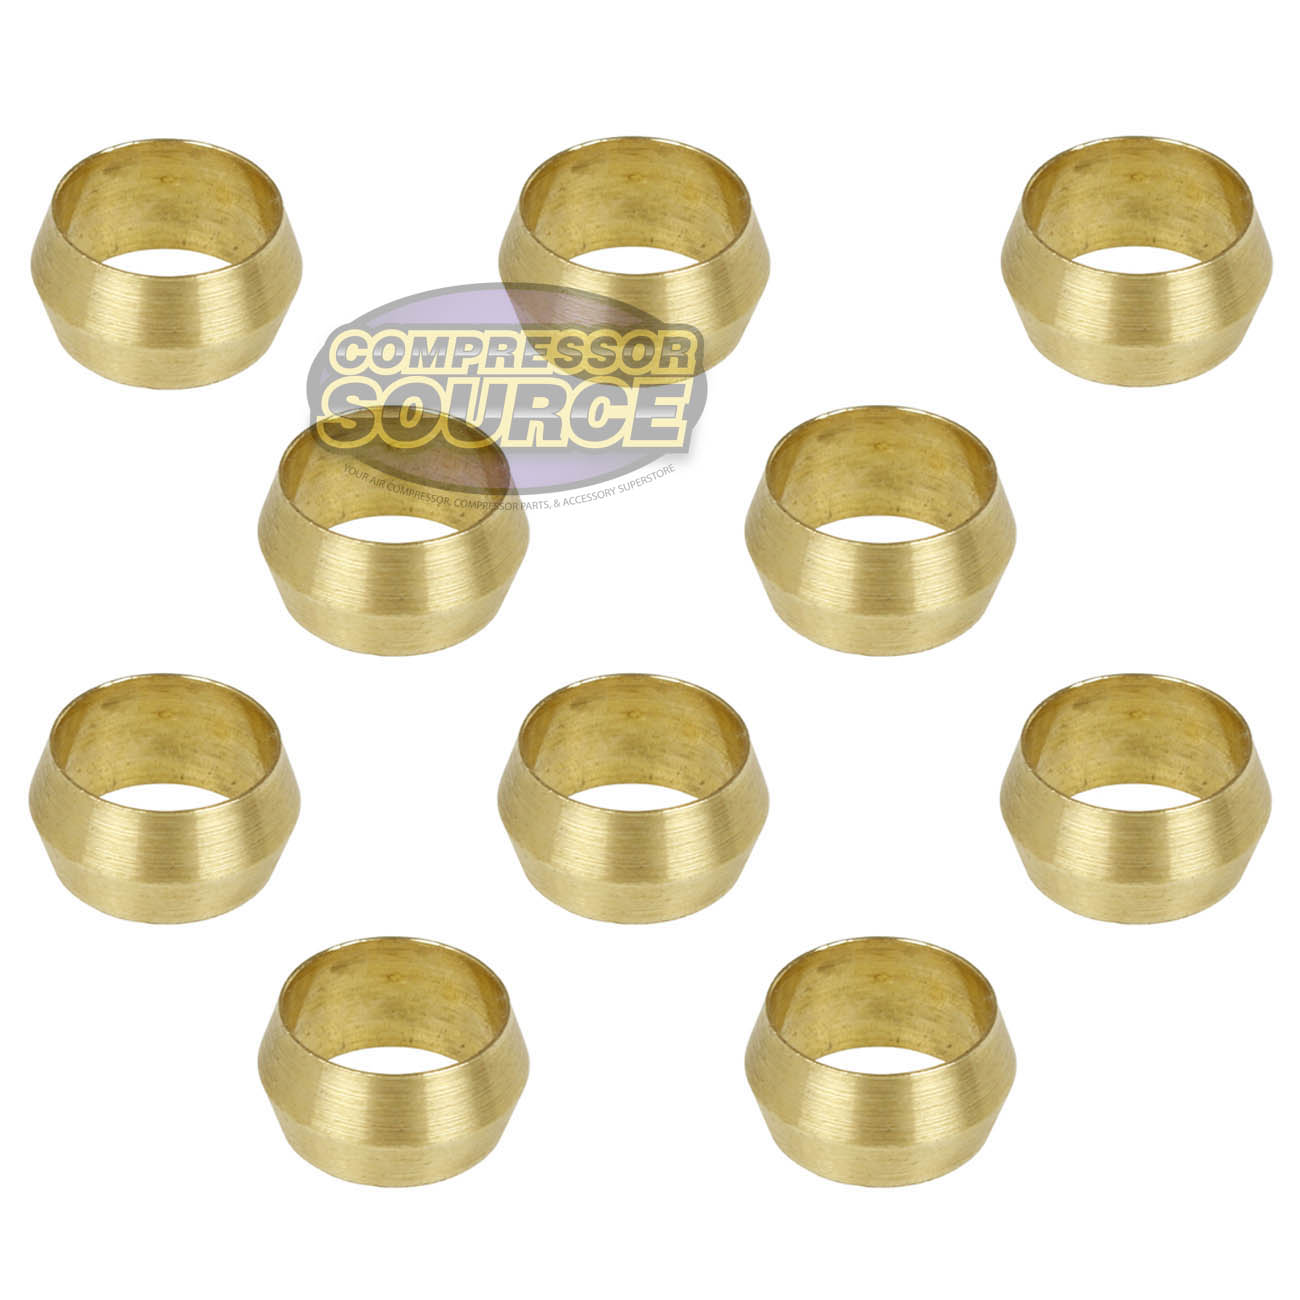 10 Pack 3/8" Compression Sleeve Solid Brass Ferrule for 3/8" Compression Tubing